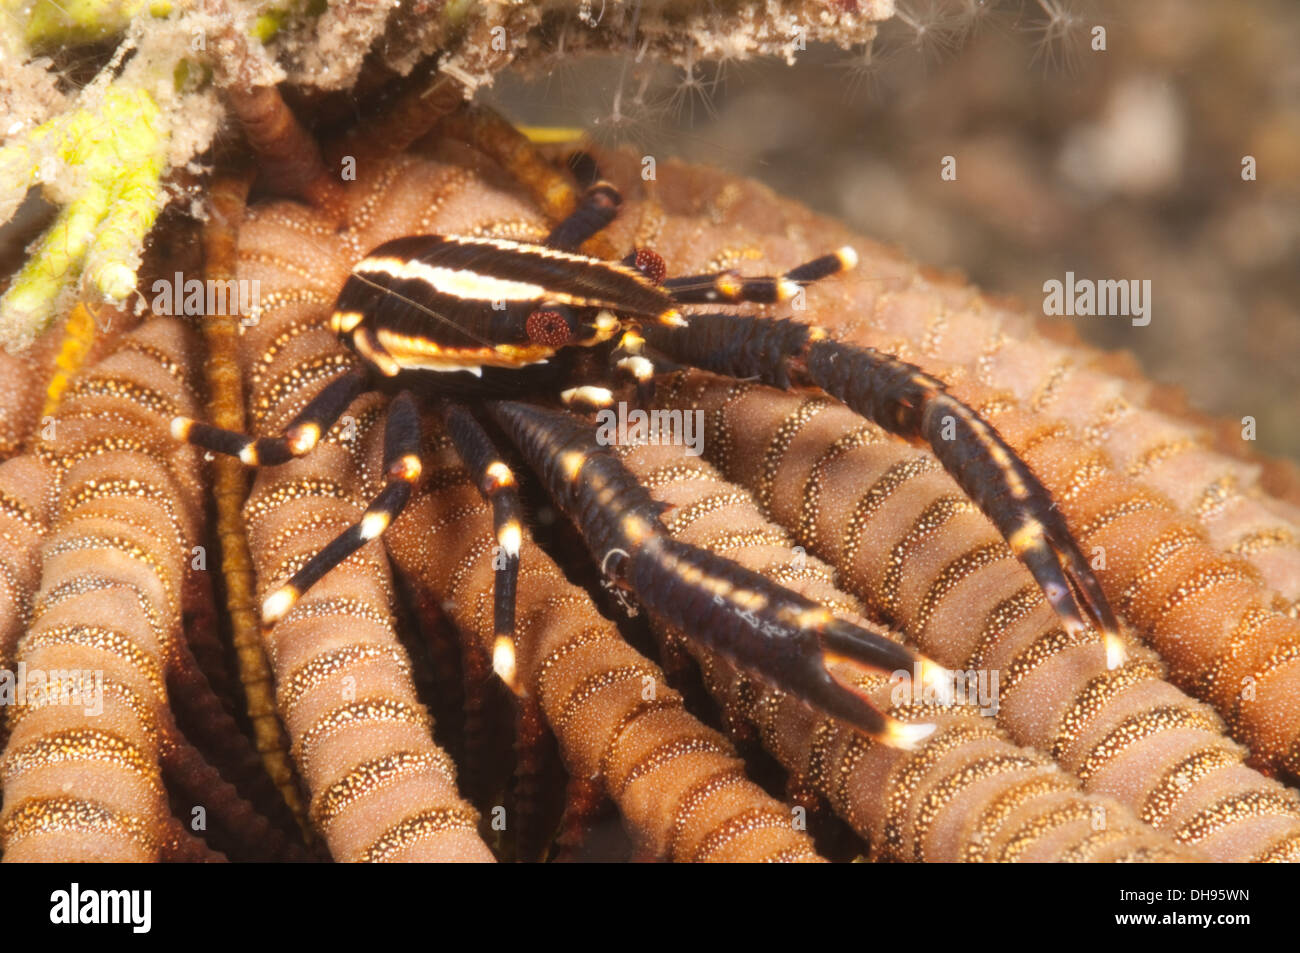 Squat lobster in a crinoid Stock Photo